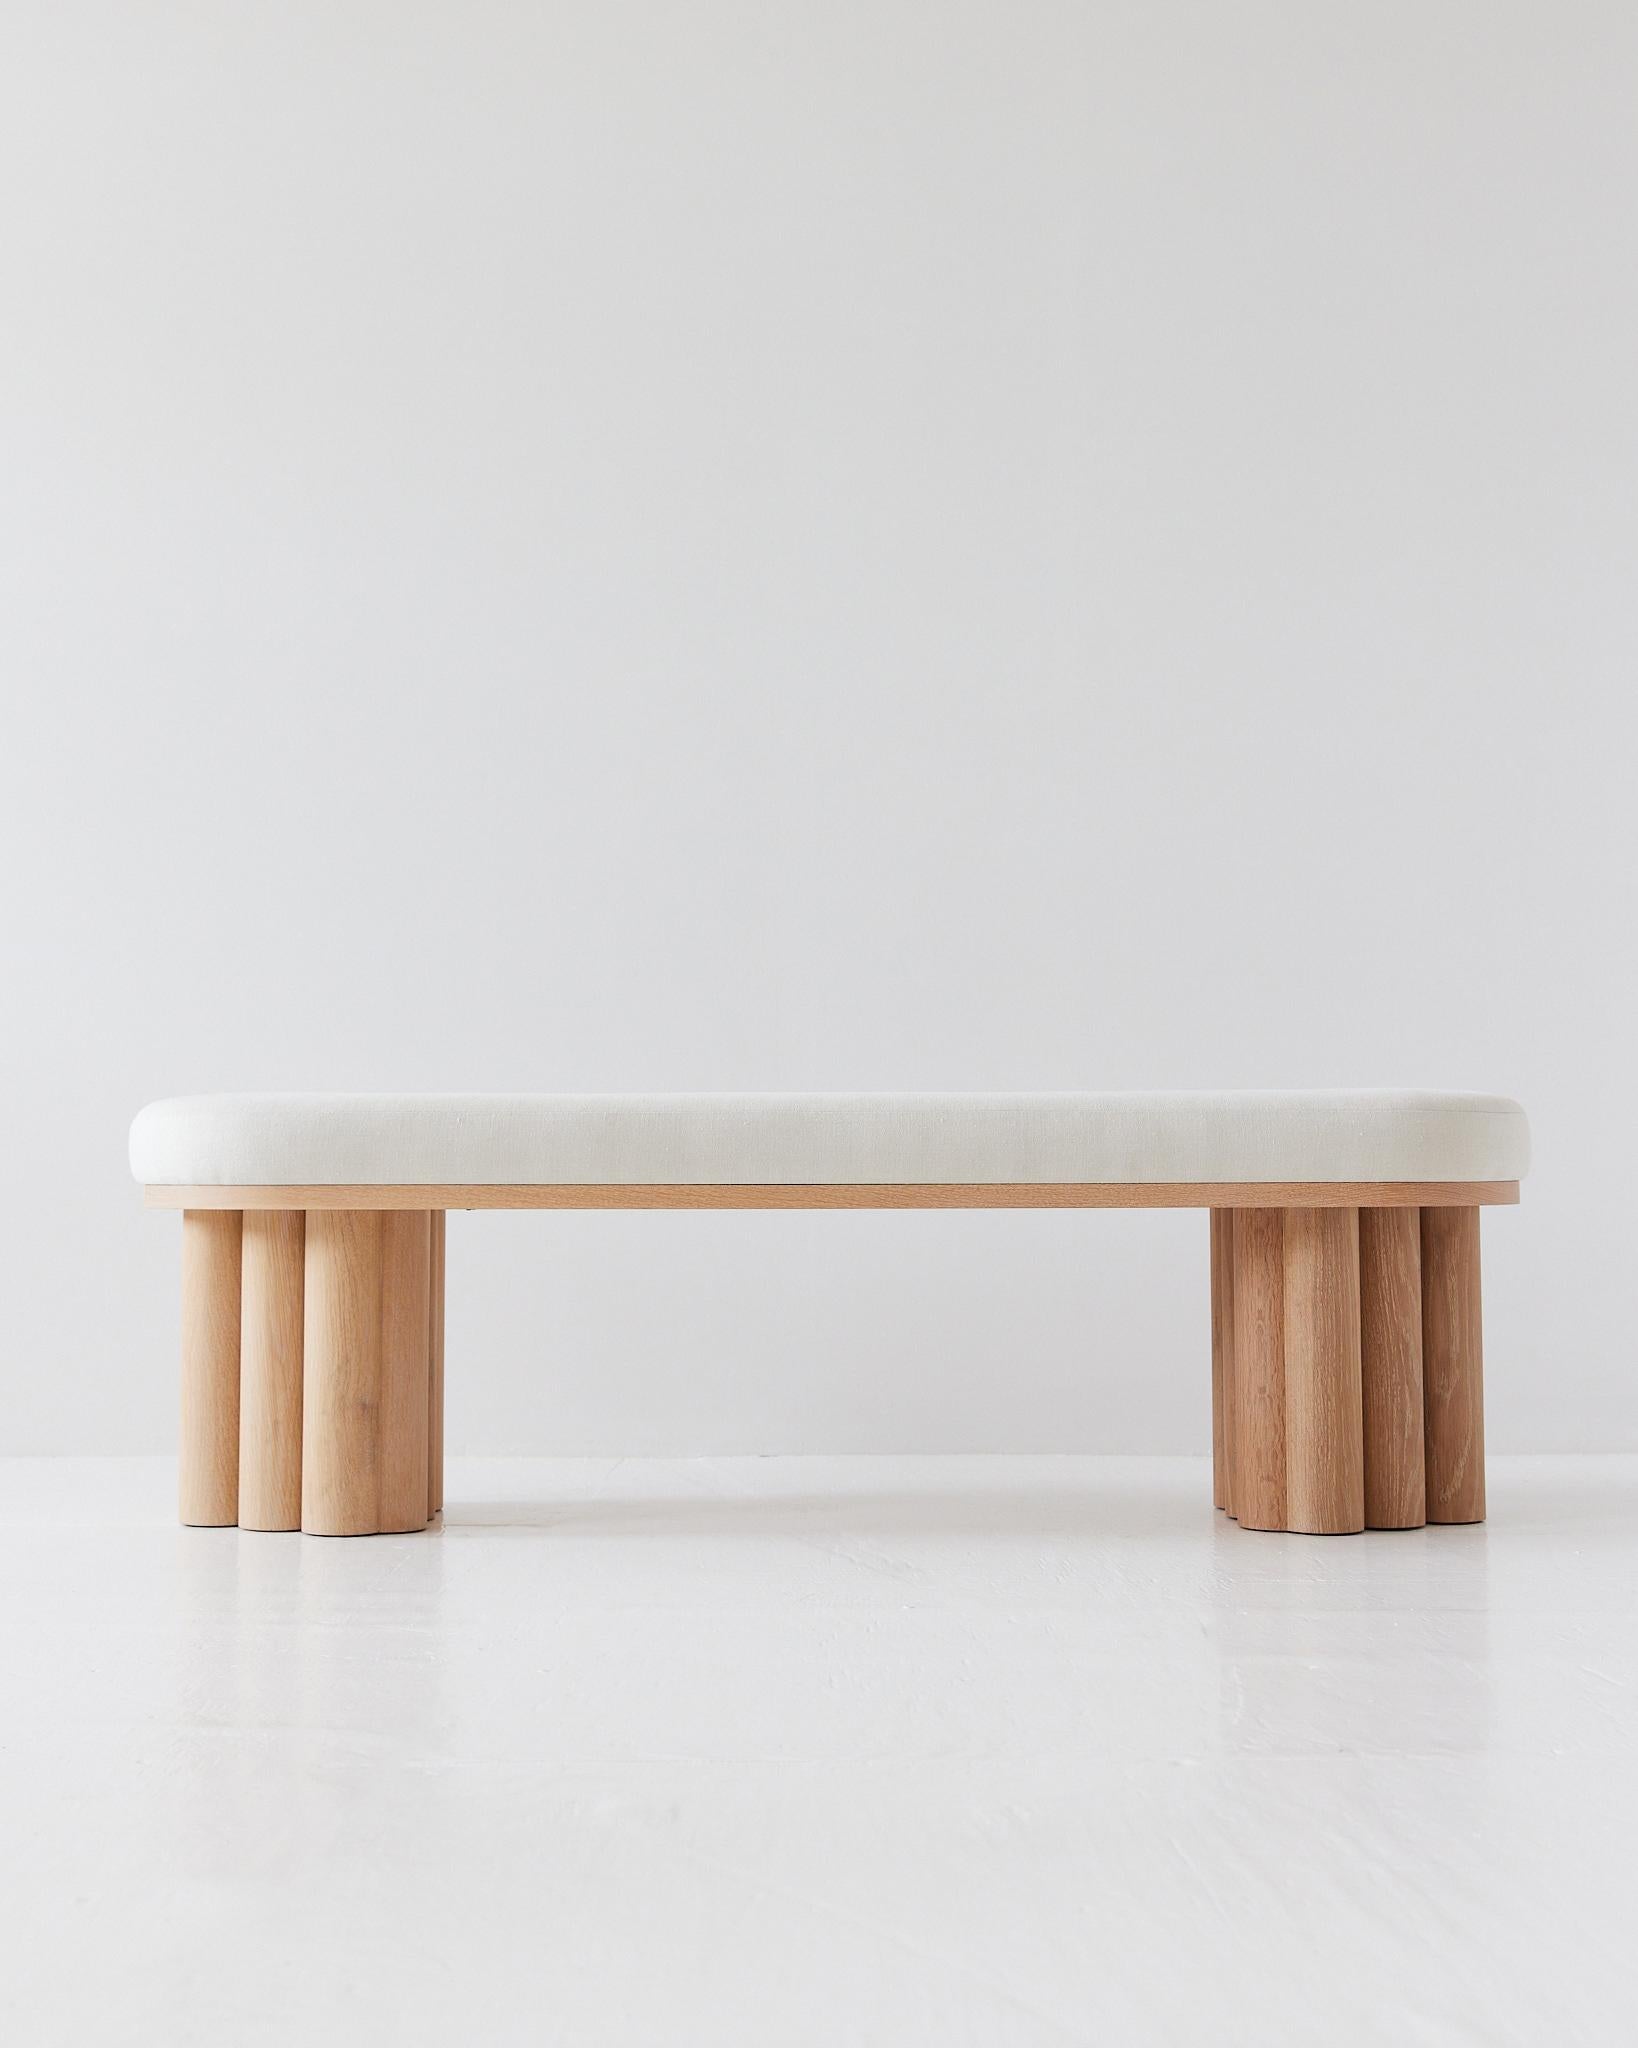 The Doric bench is a versatile and elegant piece, which has found its place in museums, offices, and homes. The brutalist, monolithic legs suggest ancient columns found around the world, offering up a simple and understated quality which is sure to